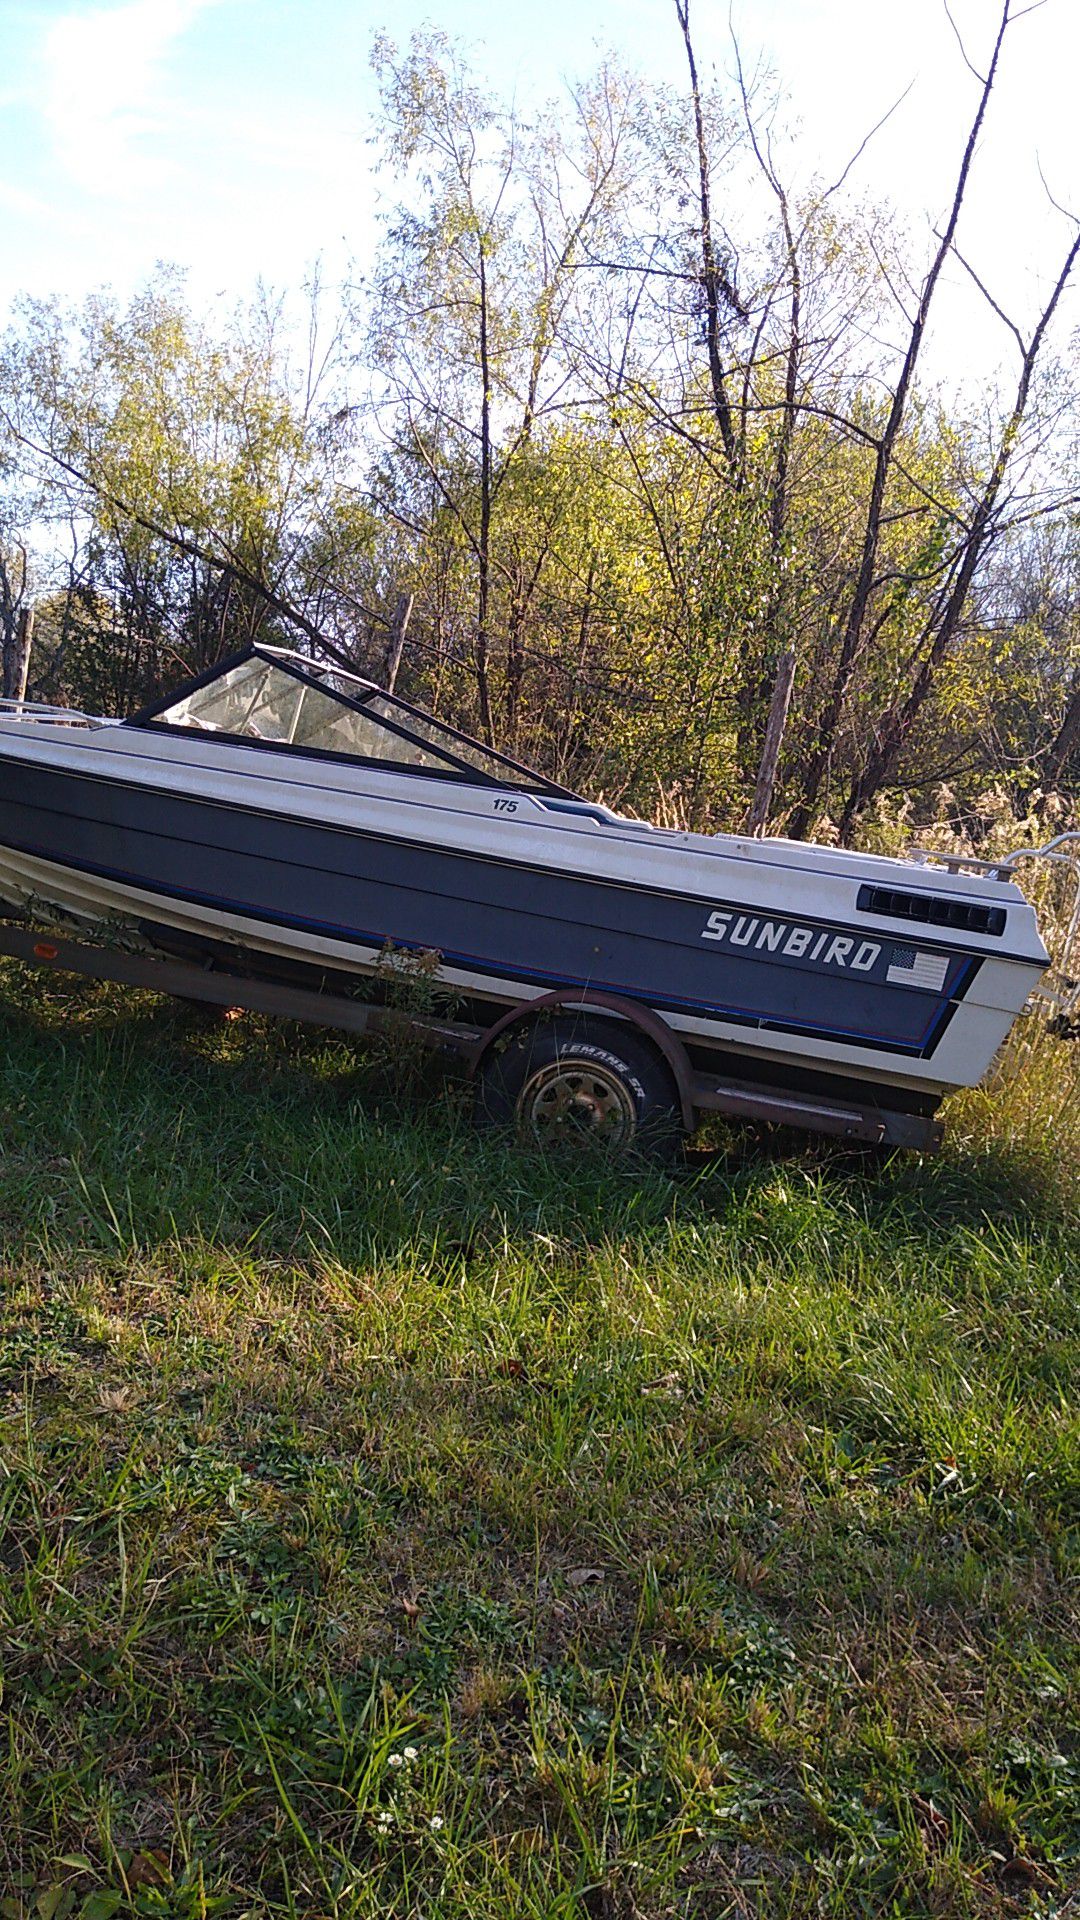 Sunbird for sale with trailer